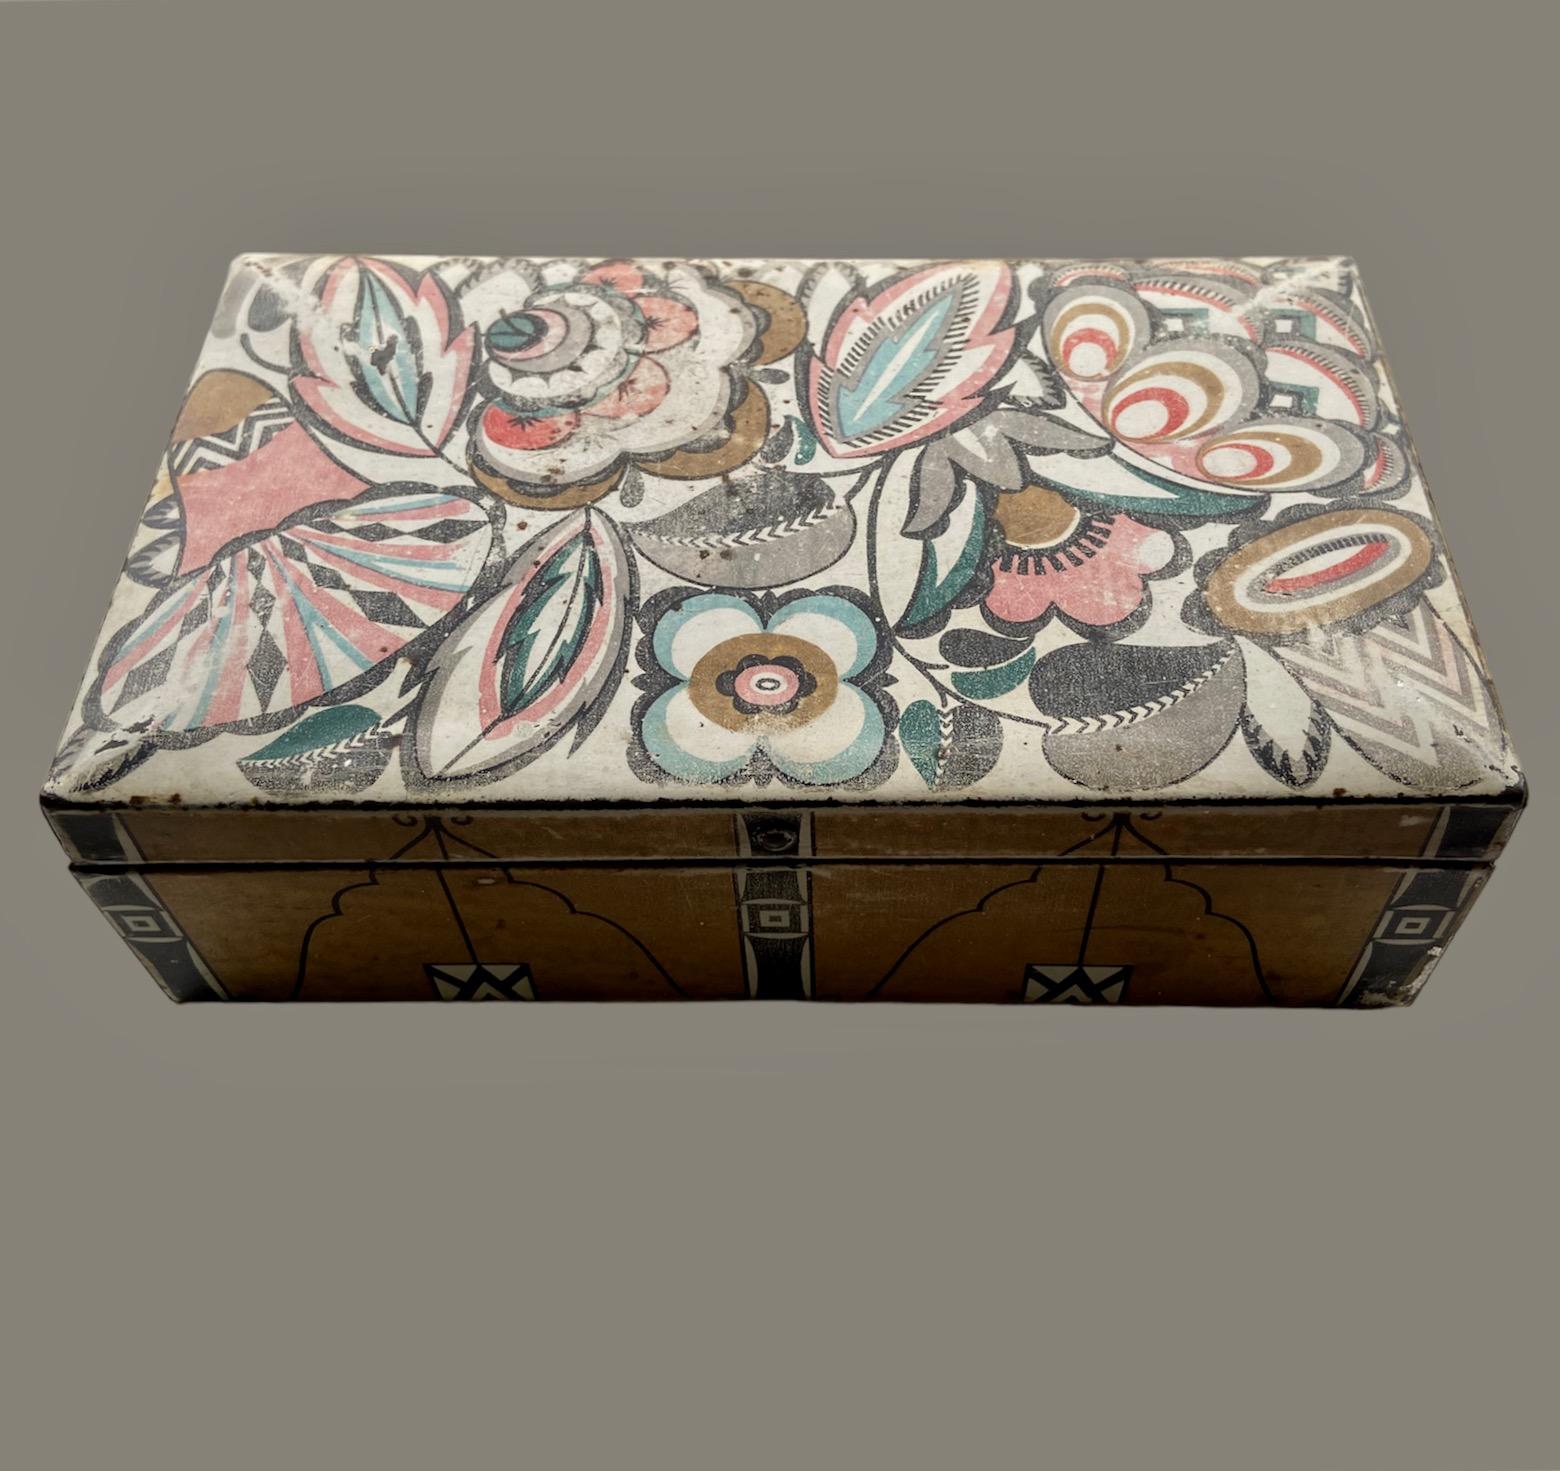 Tin Emanuel josef Margold, a secessionist box for the Bahlsen cookie factory c. 1915 For Sale